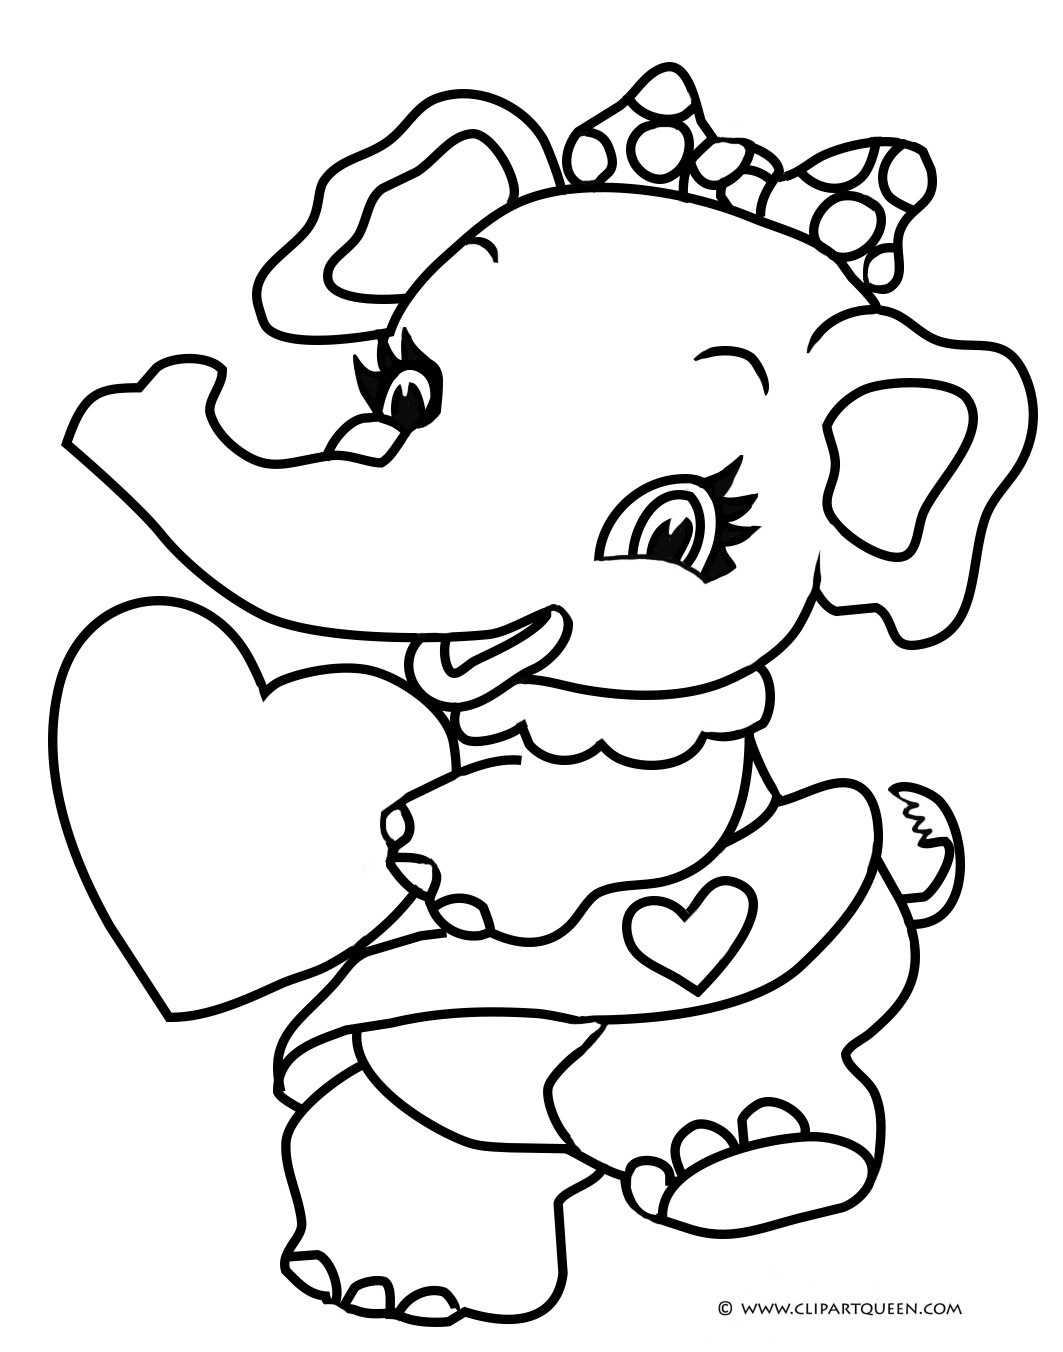 Valentine Coloring Sheets Free Printable
 13 Valentine s Day coloring pages